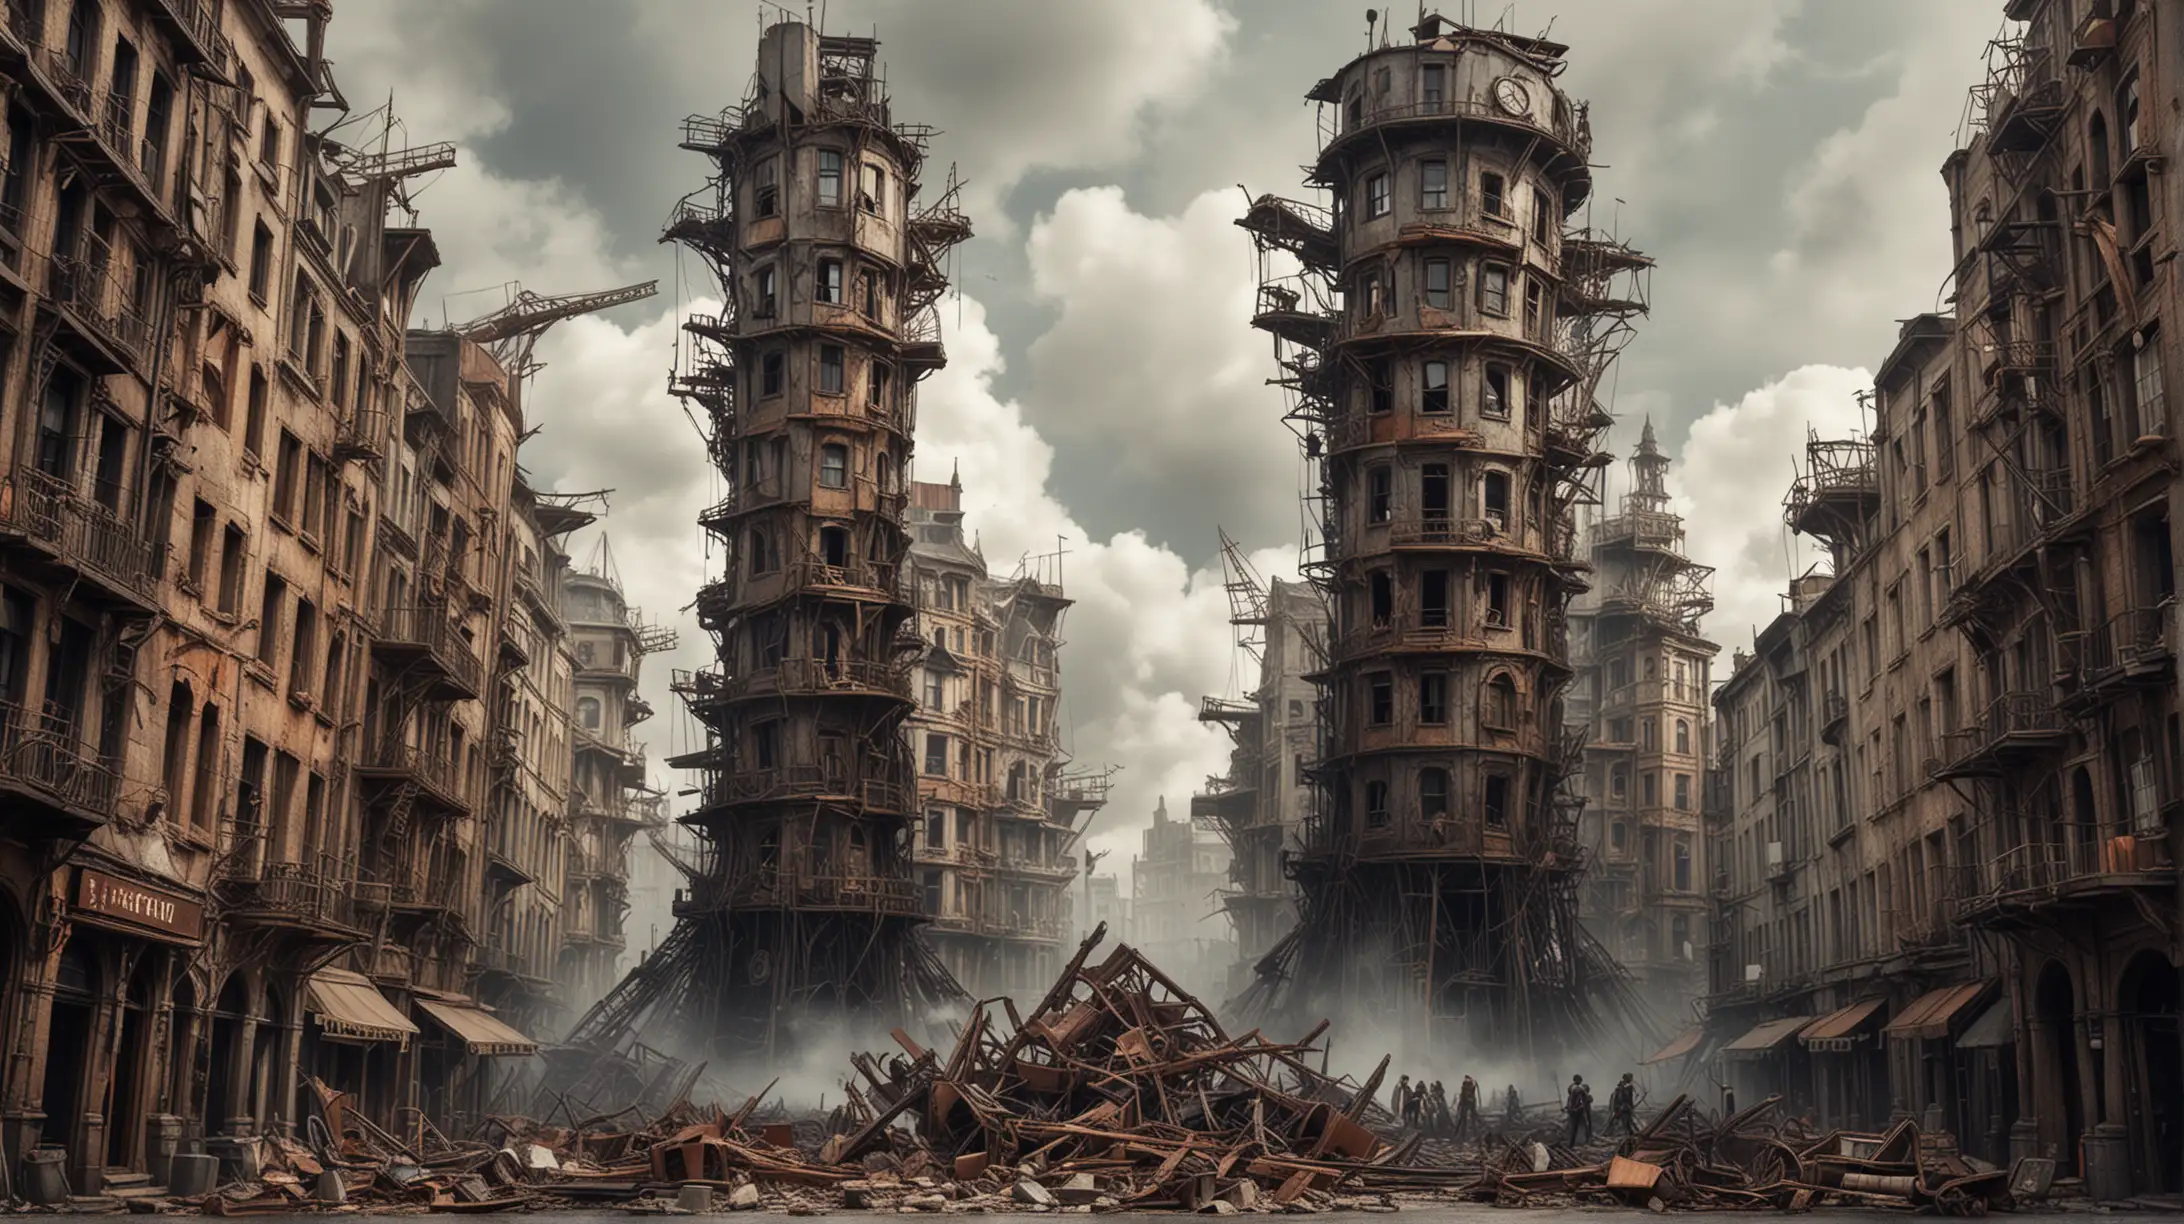 Steampunk City Tower Collapse Urban Disaster Art